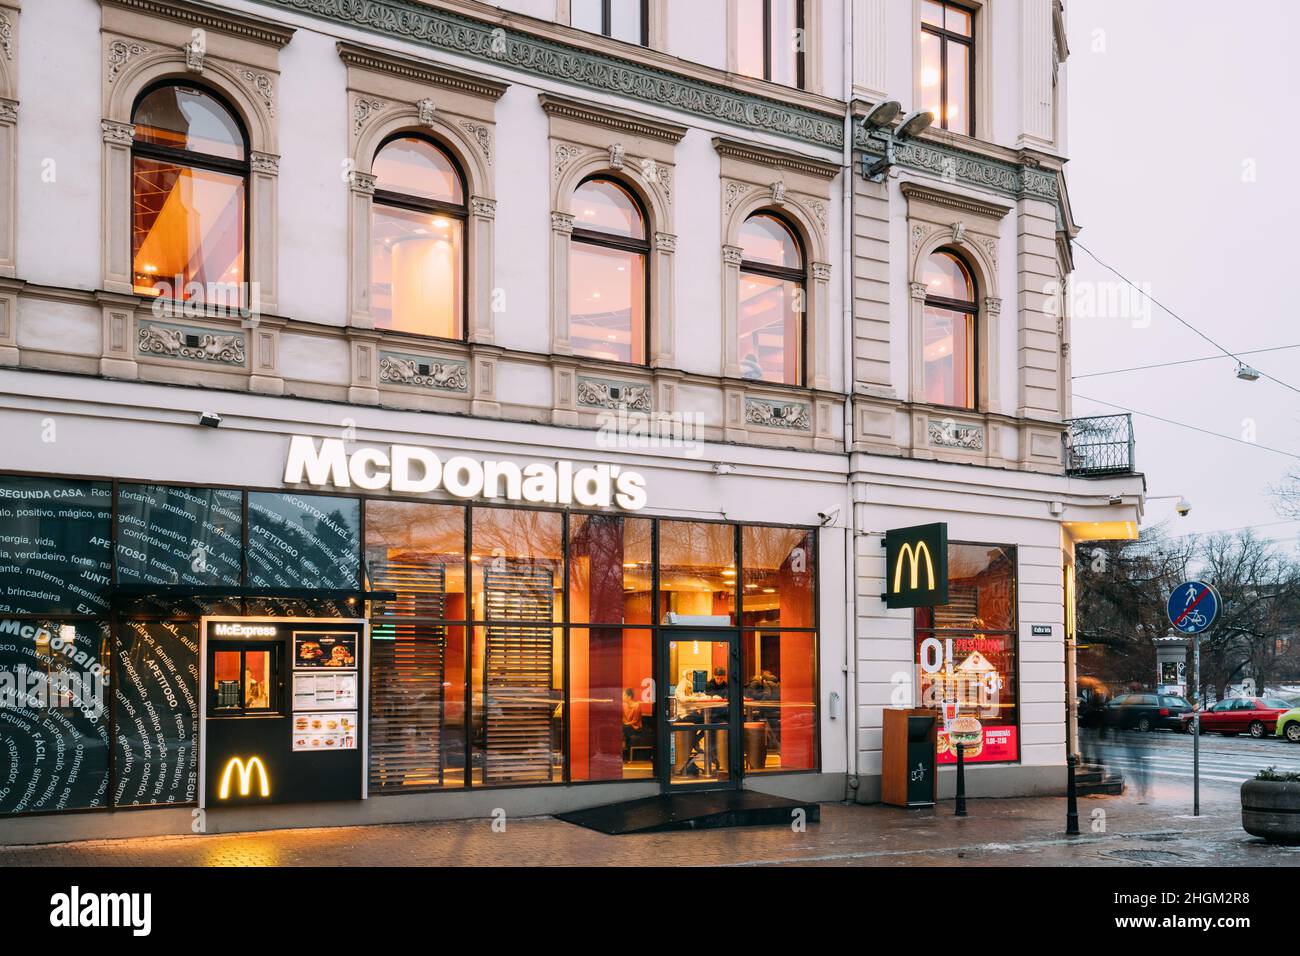 Riga, Latvia. Mcdonalds Restaurant Cafe In Old Building In Kalku Street.  Mcdonald's Corporation Is The World's Largest Chain Of Hamburger Fast Food  Stock Photo - Alamy